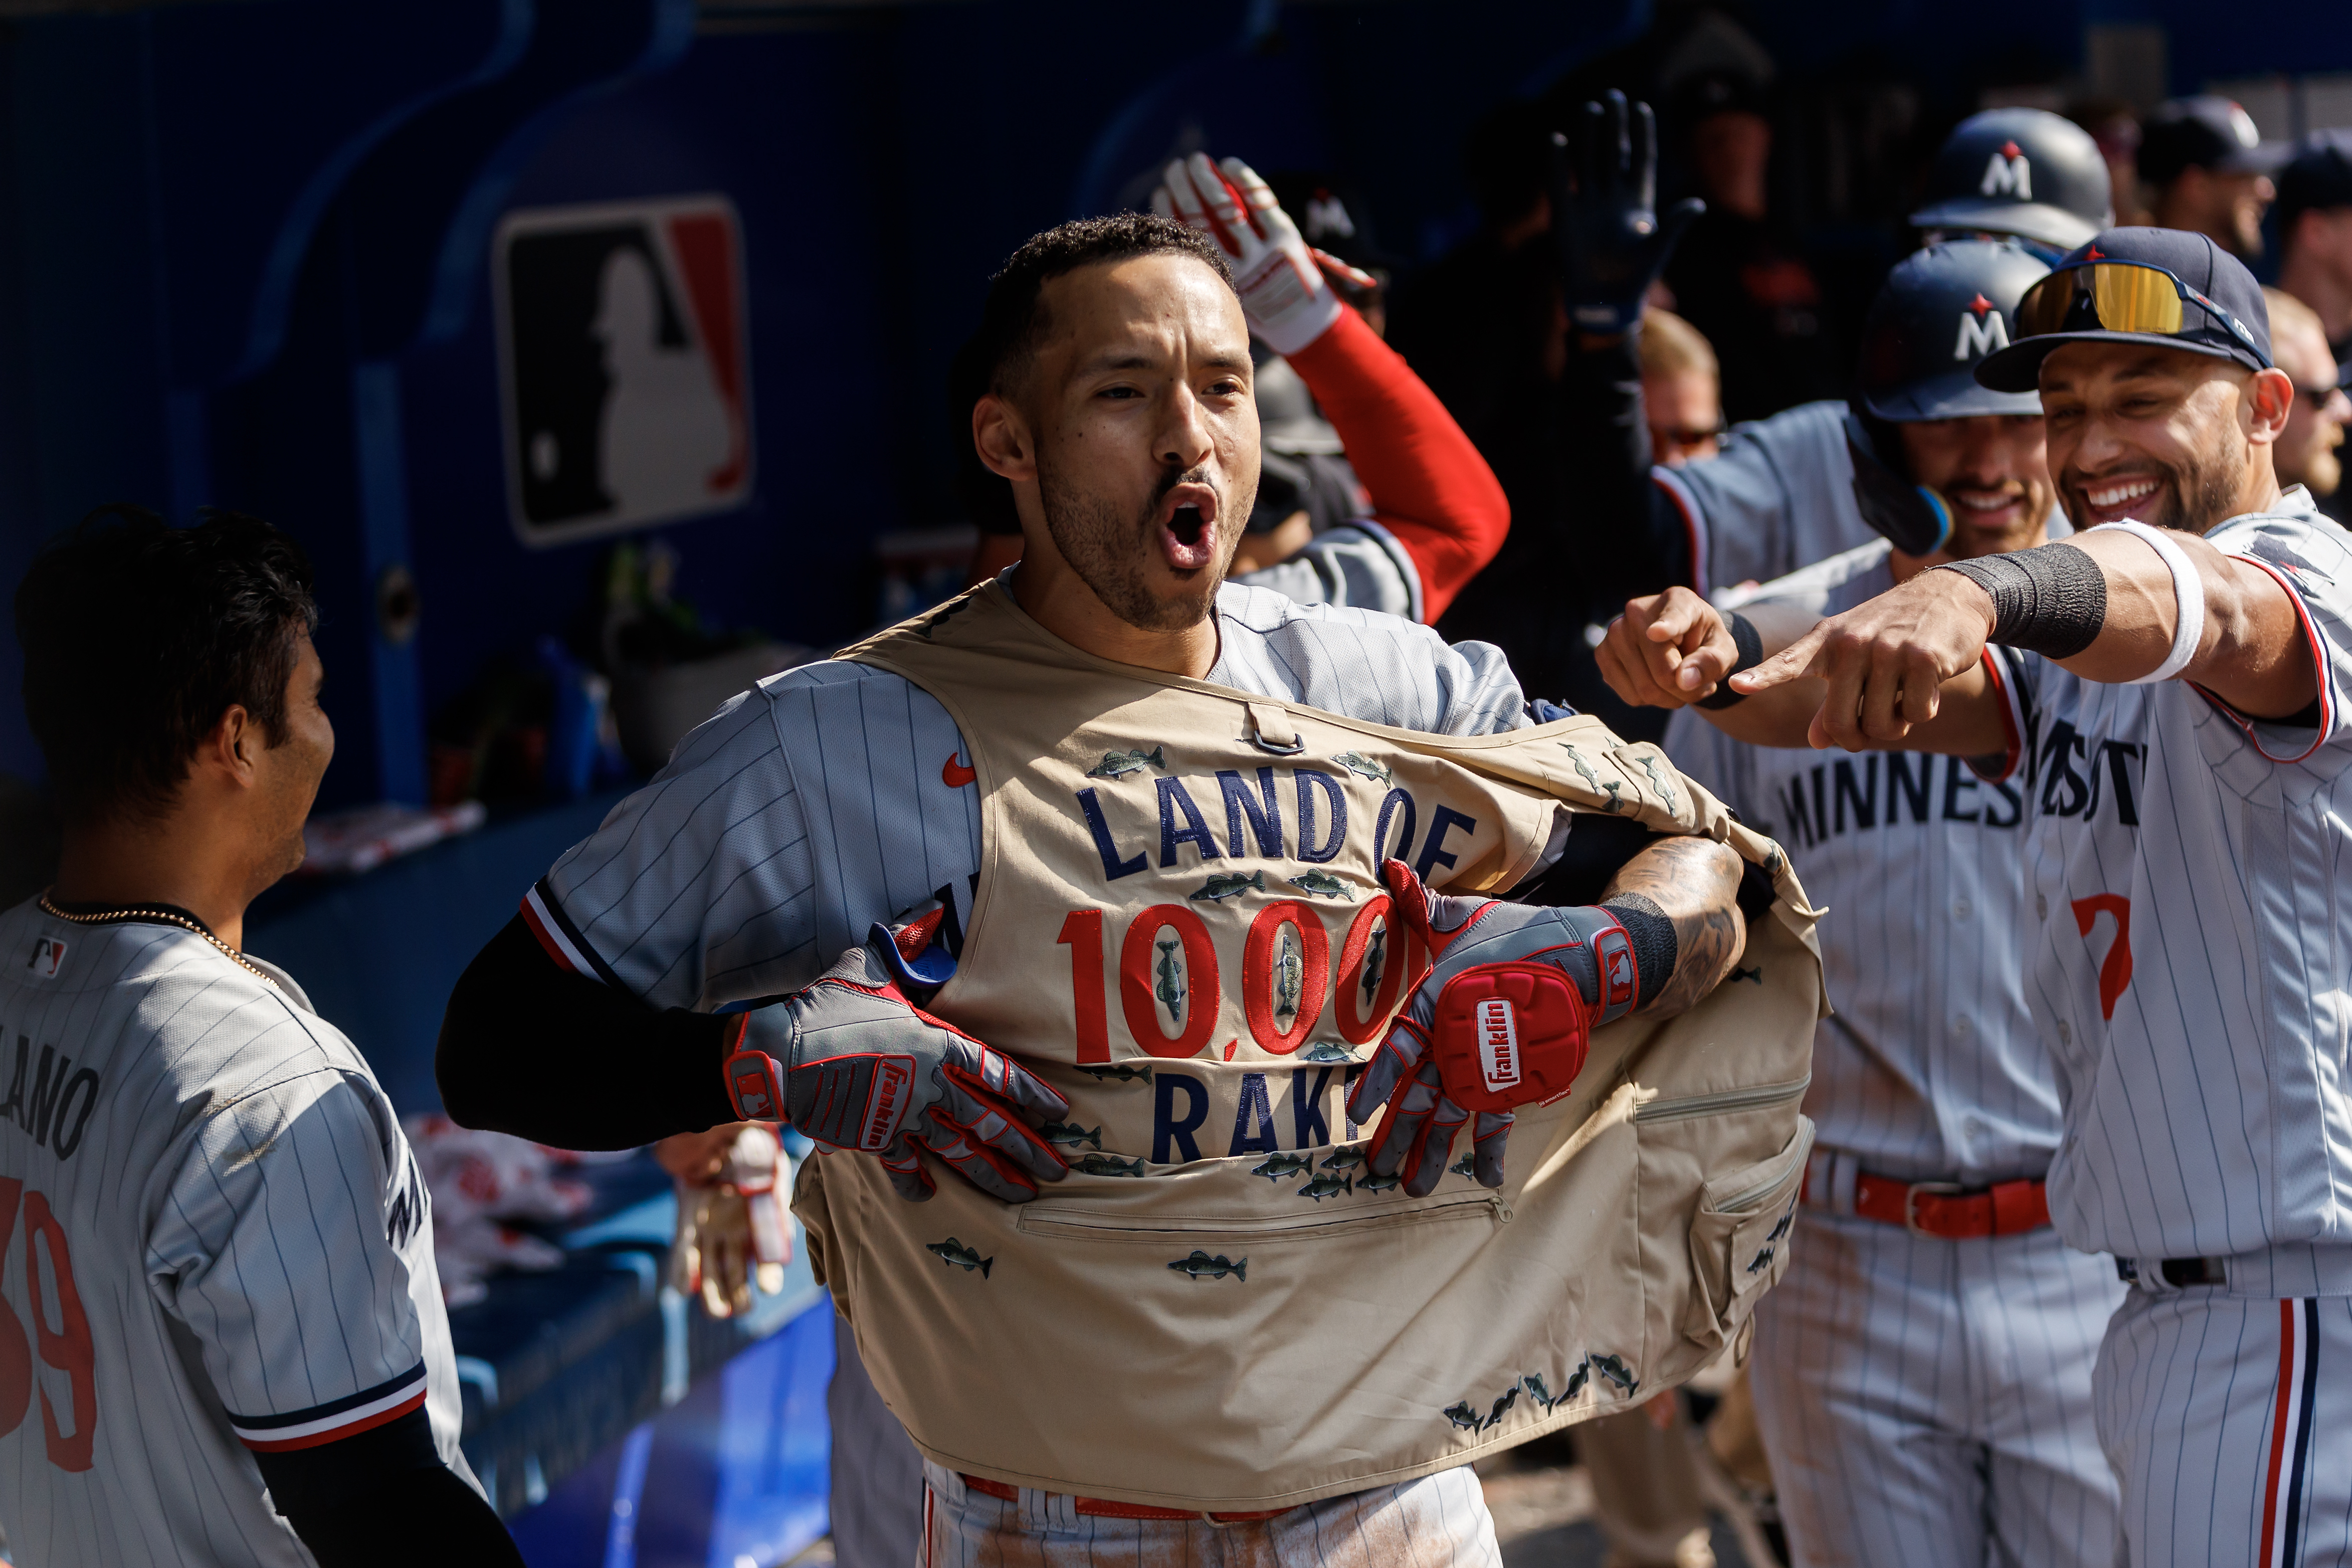 Watch: Carlos Correa tries on his new uniform & looks ready to